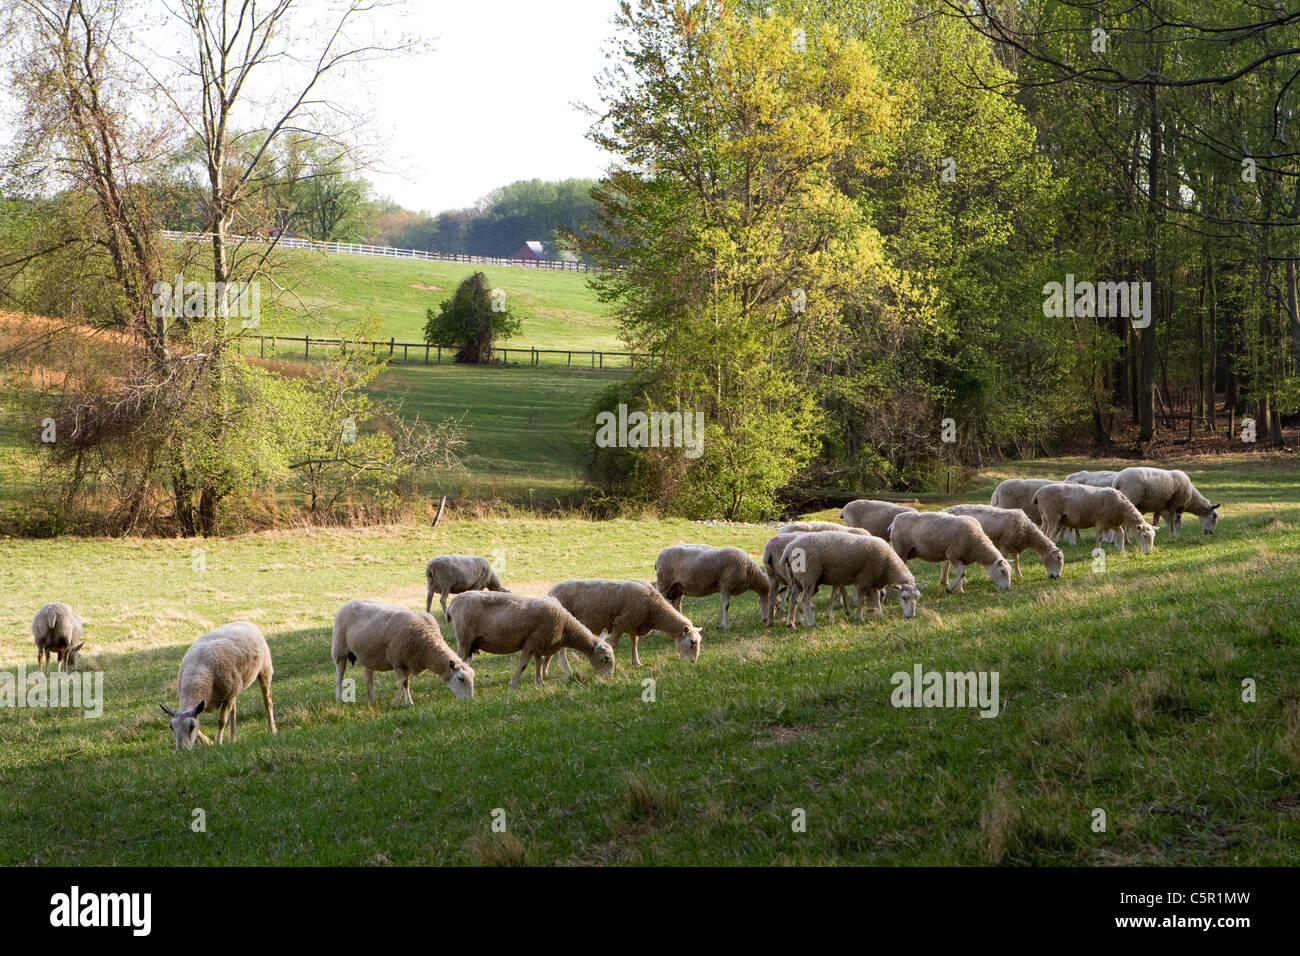 Sheep graze on grass in a meadow. Stock Photo